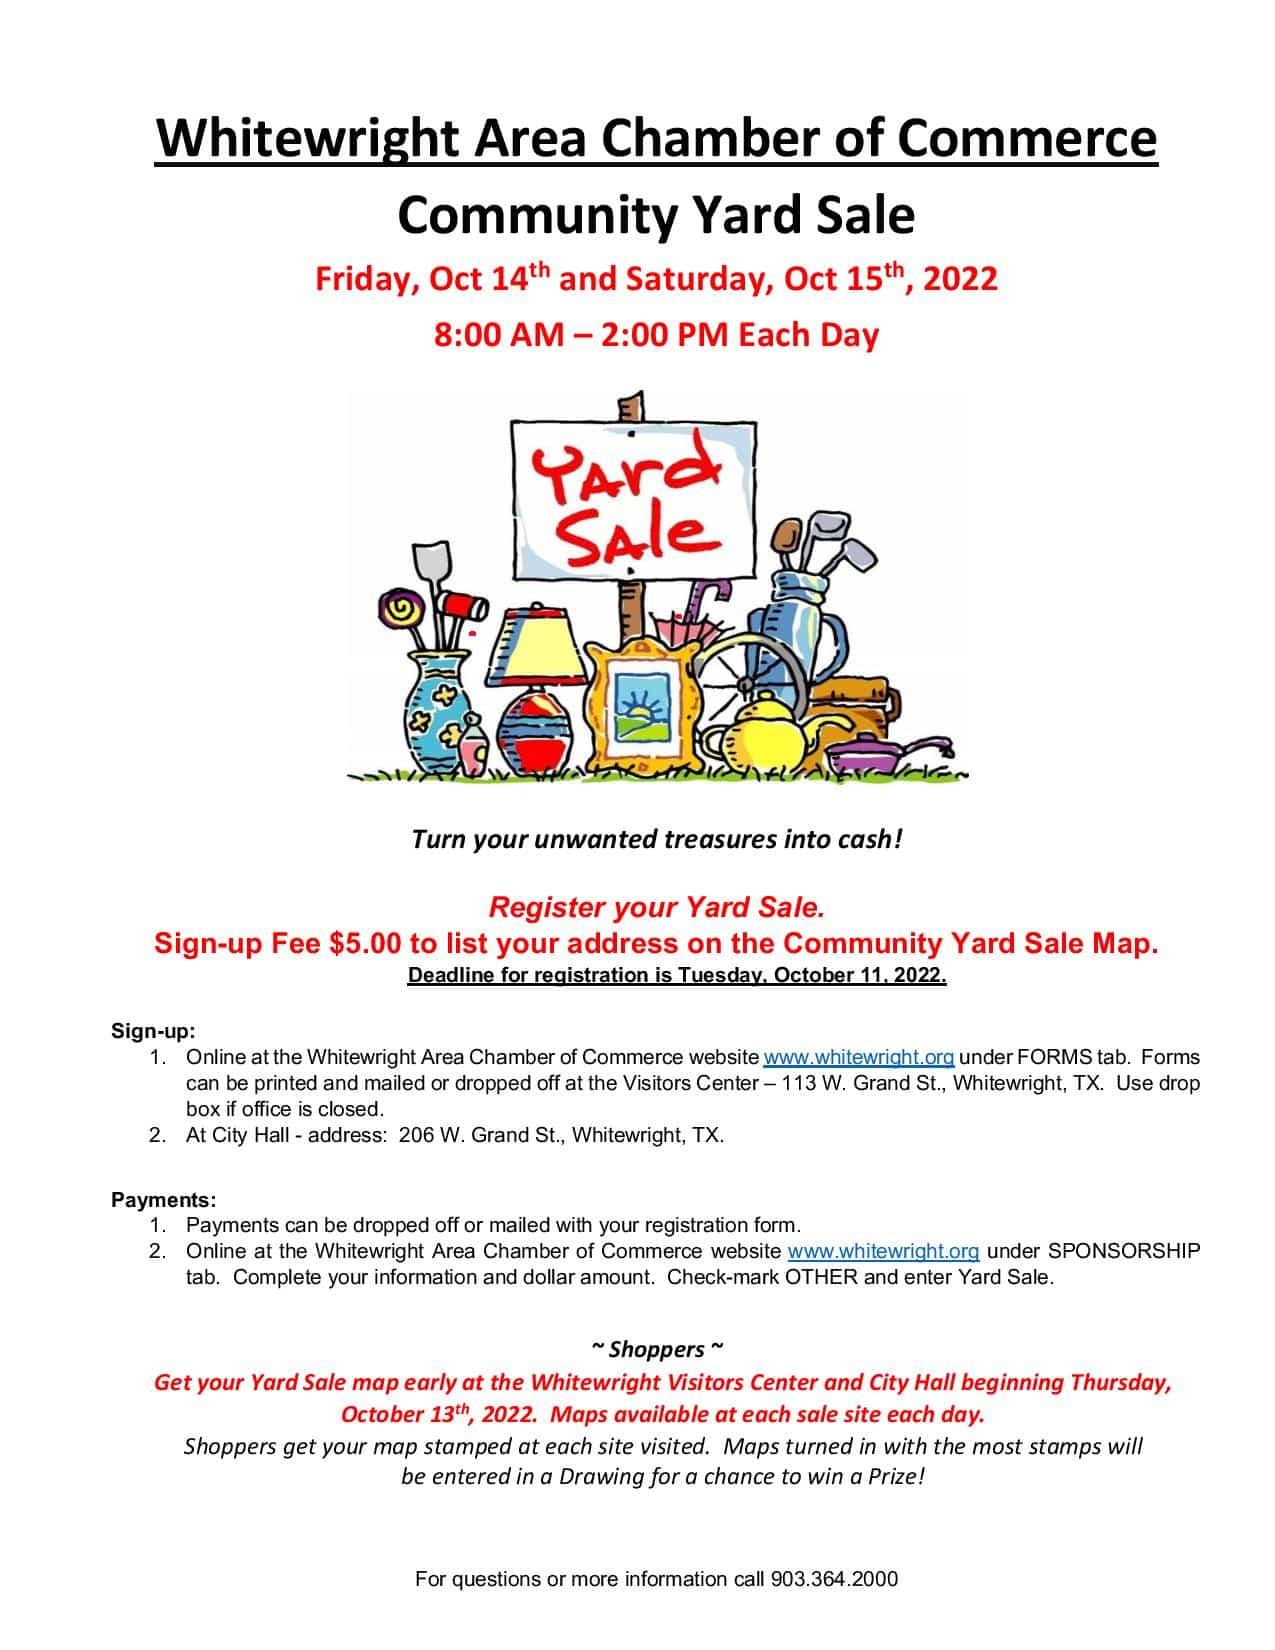 Whitewright Area Chamber of Commerce Community Yard Sale - October 14th & 15th 2022